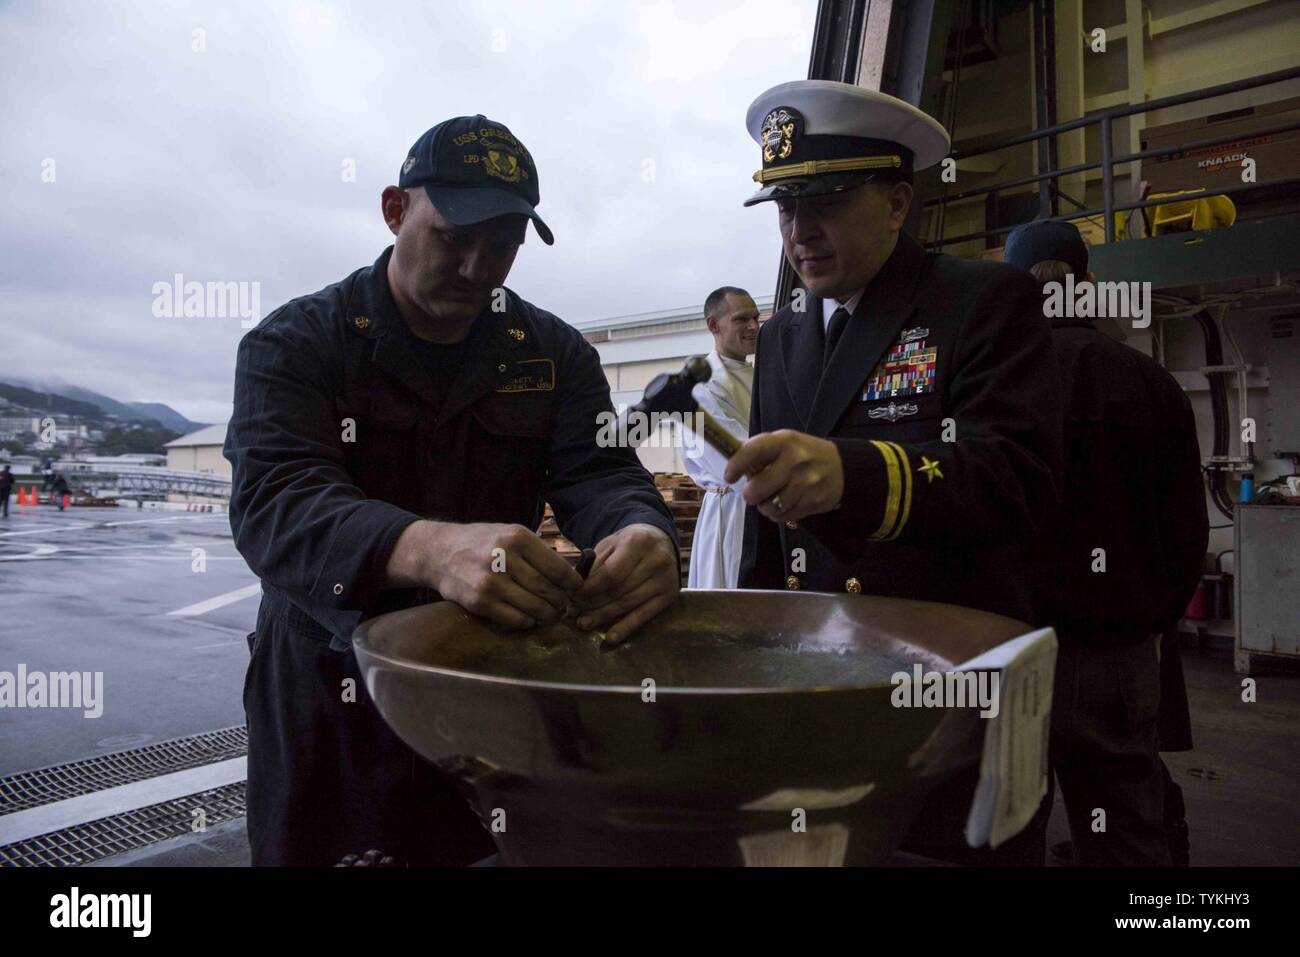 SASEBO, Japan (Nov. 28, 2016) Chief Petty Officer Justin Beckett holds a chisel as Lt. j.g. Brian Caplan hammers a letter of his son’s name into the bell of the amphibious transport dock ship USS Green Bay (LPD 20) during a baptism held in the ship’s hangar bay. Caplan’s son, Theo, was the first newborn to have his name engraved inside Green Bay’s bell. Conducting baptisms and engraving a child’s name into the ship’s bell is a Navy tradition that dates back several hundred years to its origins in the British Royal Navy. Green Bay, forward-deployed to Sasebo, Japan, is serving forward to provid Stock Photo